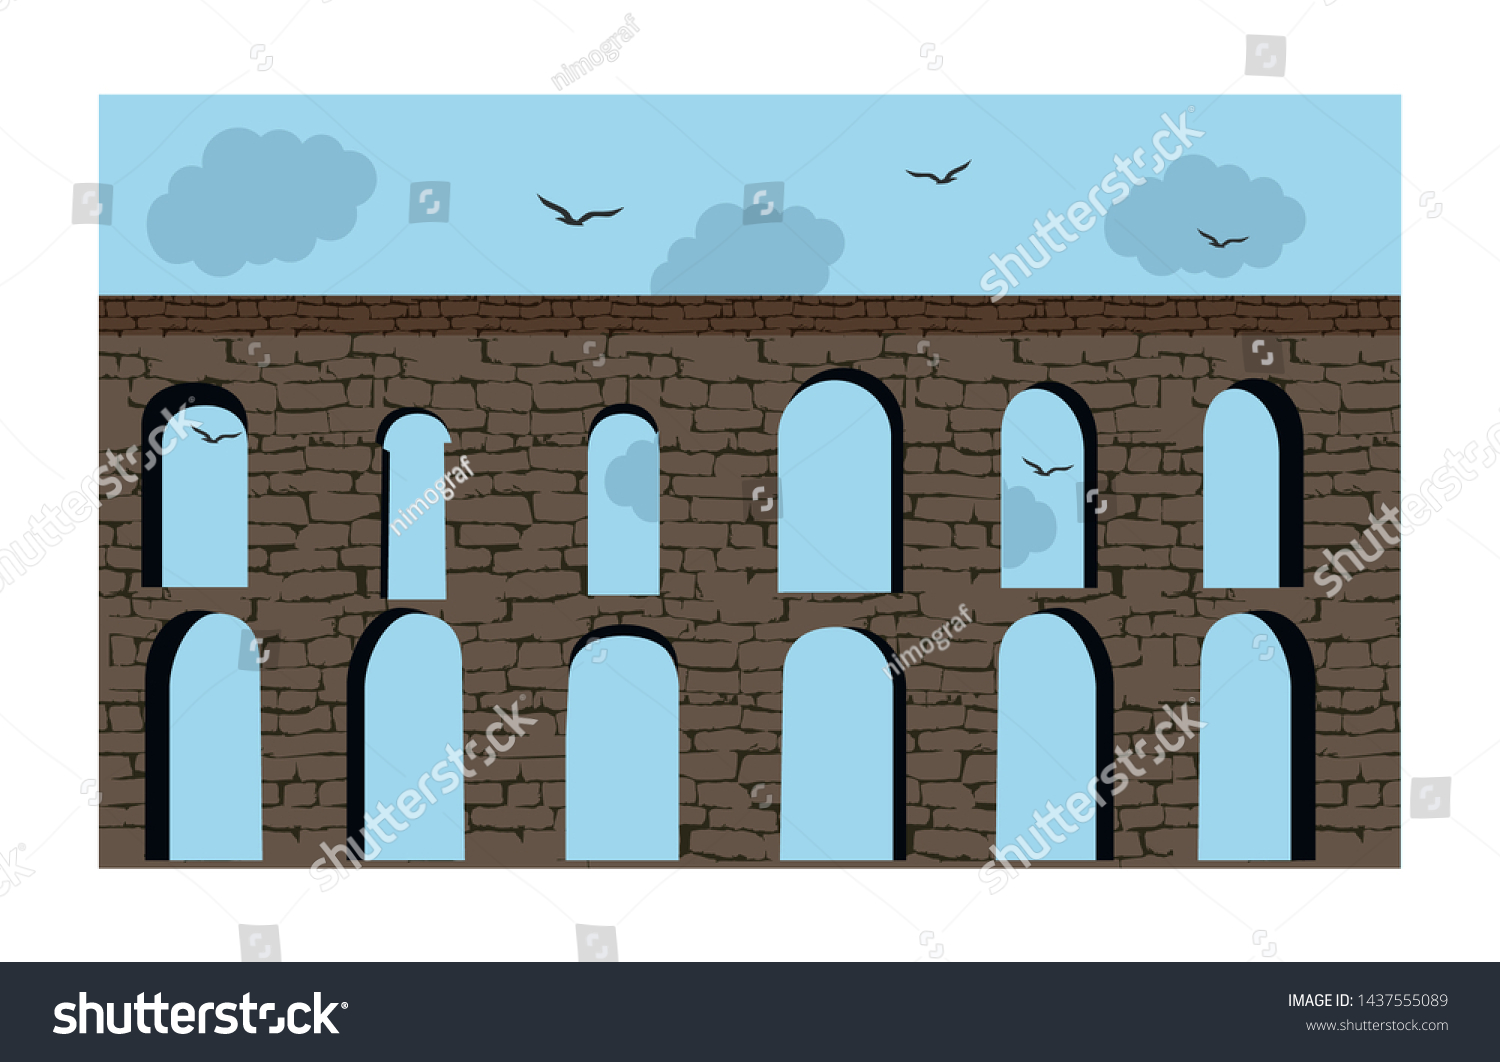 SVG of Turkey, Istanbul (Bozdagan Kemeri) Aqueduct of the Grey Falcon.  Roman aqueduct which was the major water-providing system of the Eastern Roman capital of Constantinople. Valens Aqueduct  svg